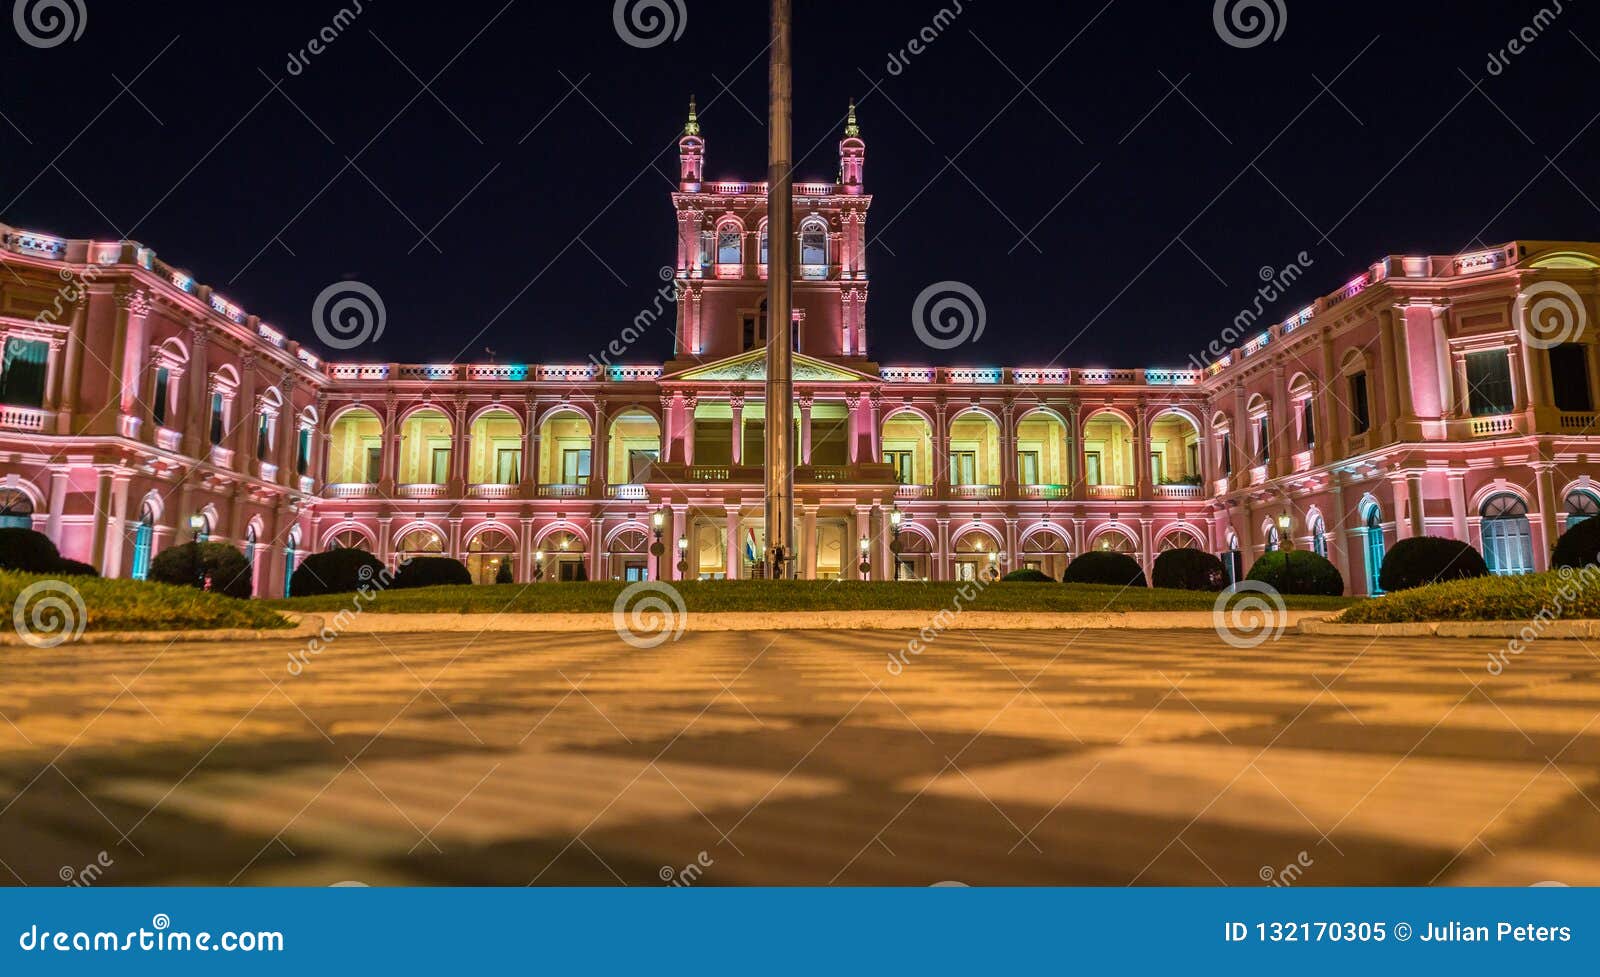 view on illuminated pink presidential palace in asuncion, paraguay at night